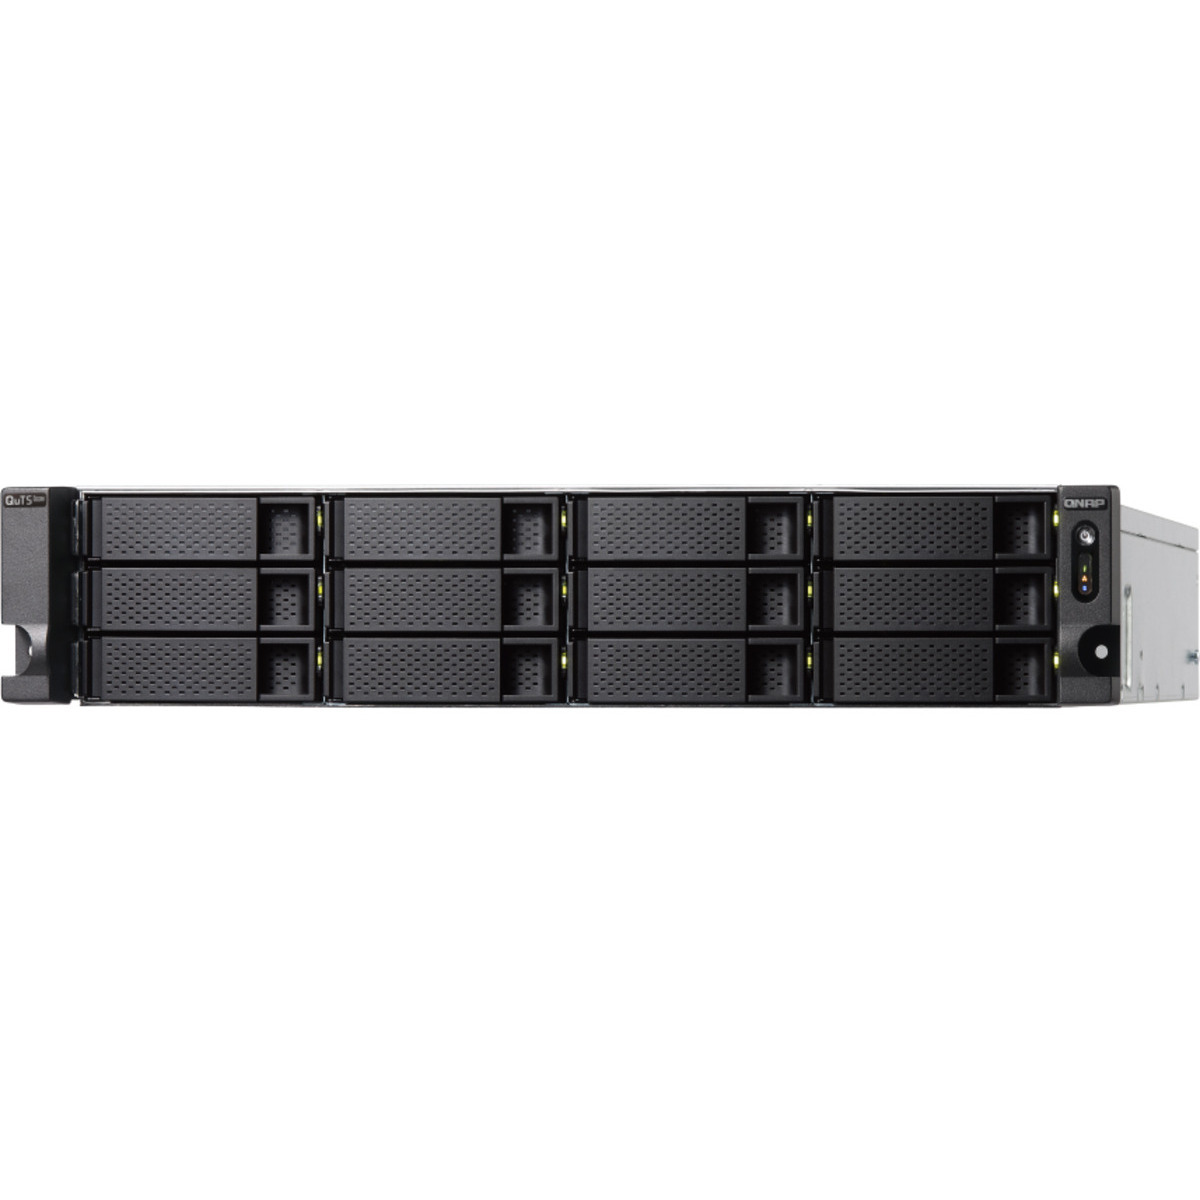 QNAP TS-h1886XU-RP R2 QuTS hero Edition 64tb 12+6-Bay RackMount Large Business / Enterprise NAS - Network Attached Storage Device 8x8tb Western Digital Red Pro WD8003FFBX 3.5 7200rpm SATA 6Gb/s HDD NAS Class Drives Installed - Burn-In Tested TS-h1886XU-RP R2 QuTS hero Edition